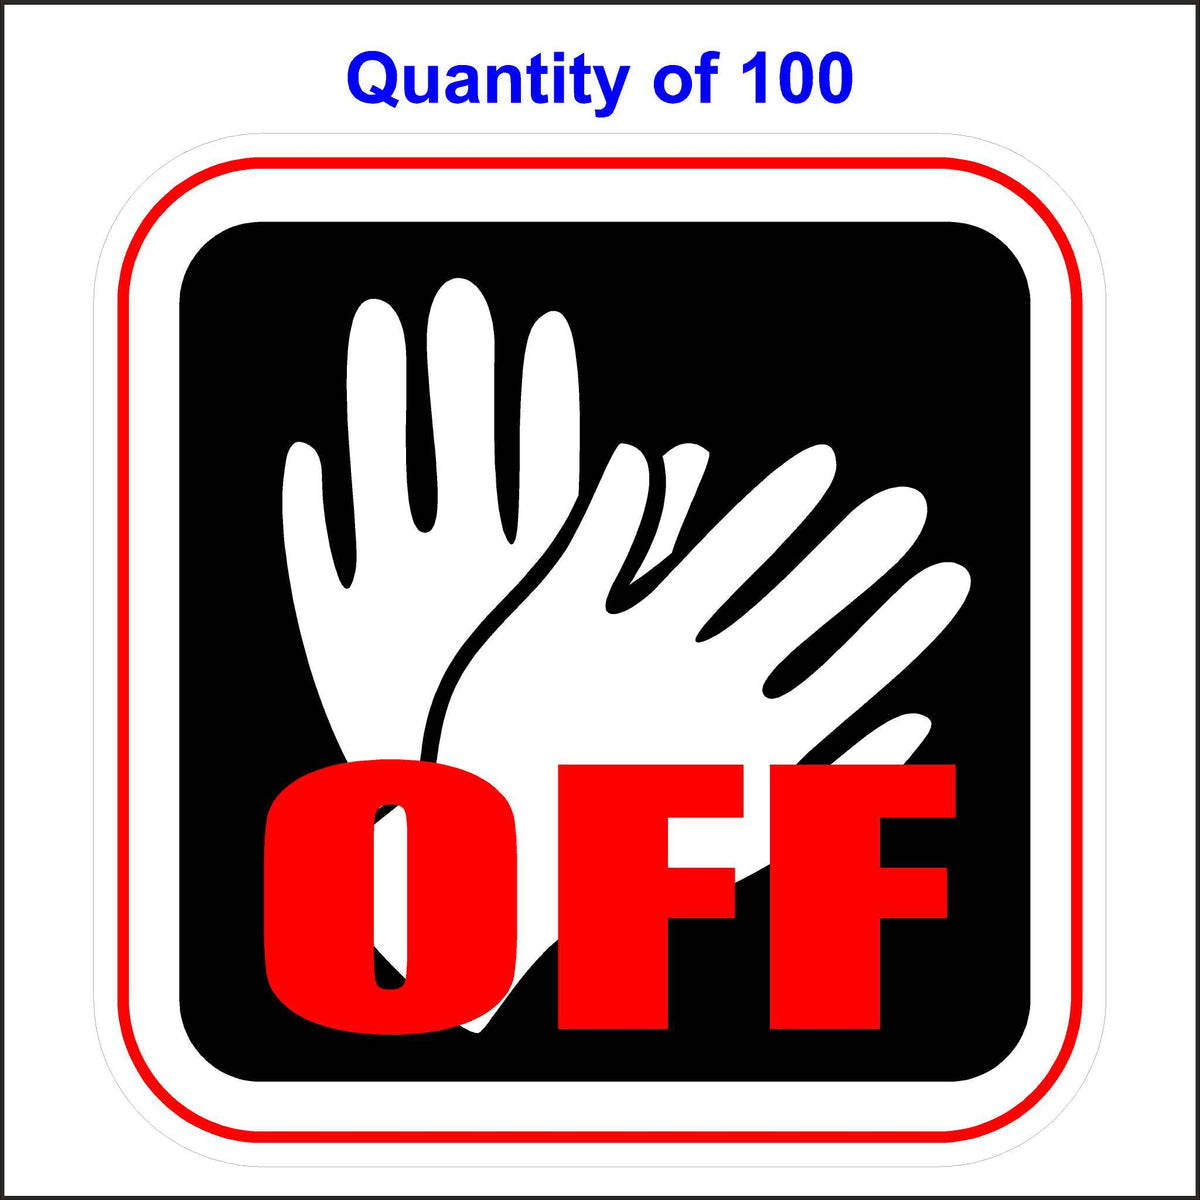 Hands off Sticker. This Sticker Has a Black Background With White Hands and the Word off Printed in Red. 100 Quantity.